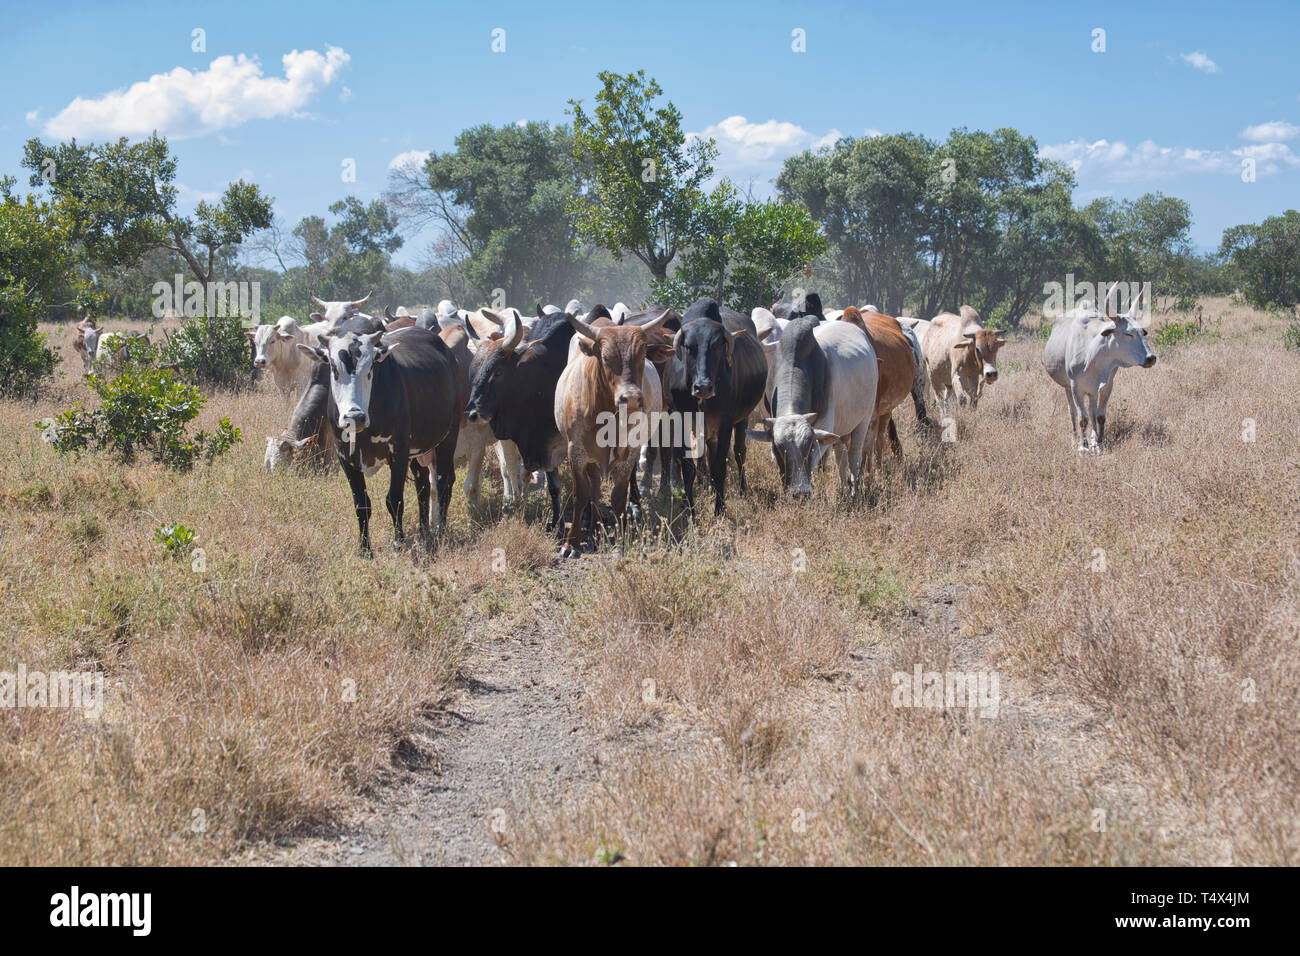 A cattle herd on Ol Pejeta conservancy, Kenya. Some 6000 cattle, mostly Boran cattle, are grazed on the conservancy and co-exist with wildlife Stock Photo